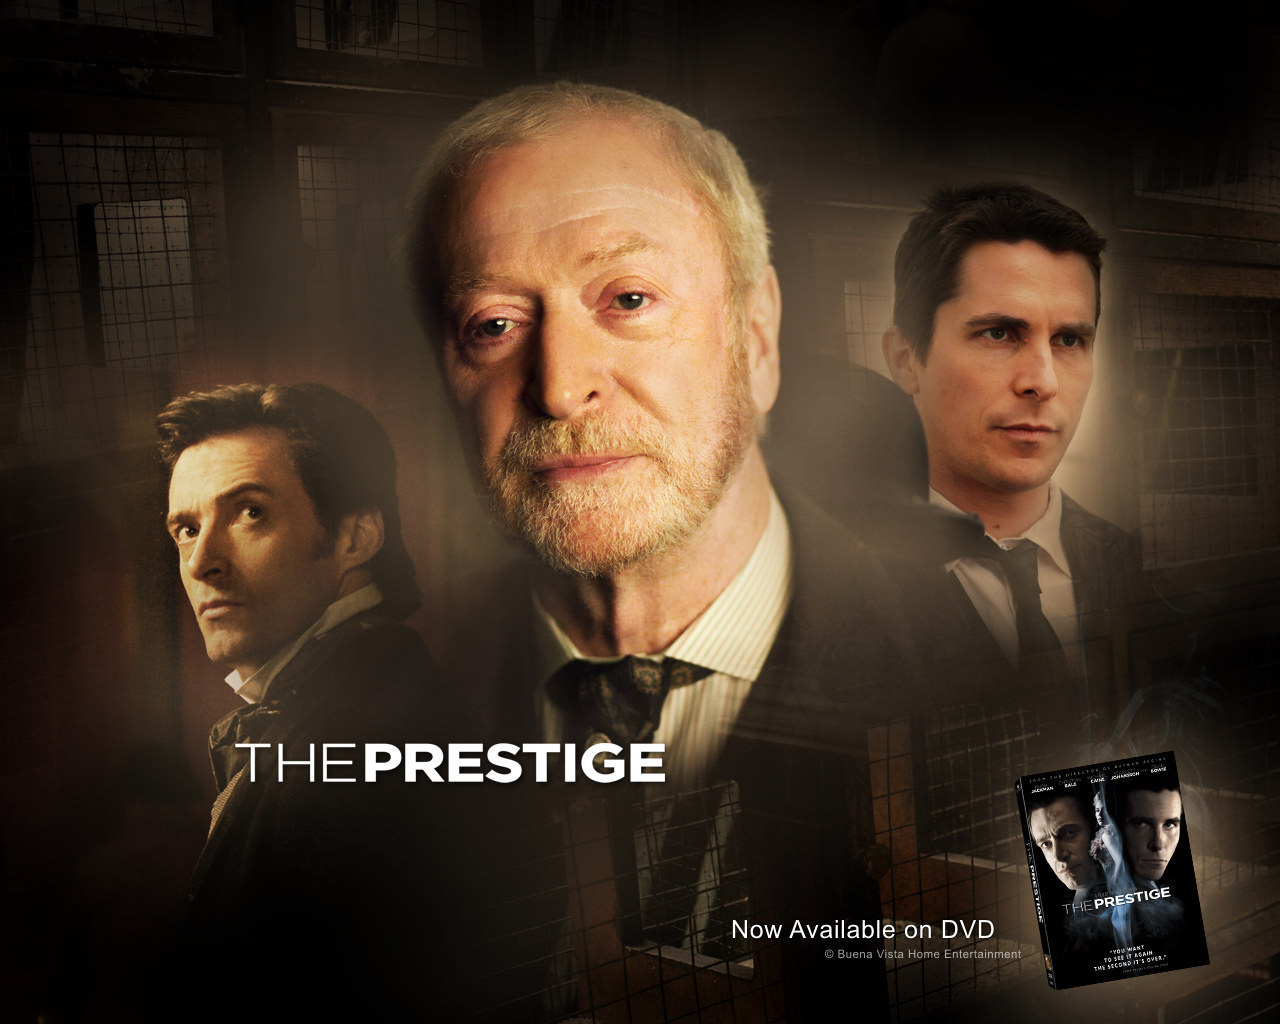 Michael Caine images Michael Caine in The Prestige Wallpaper HD